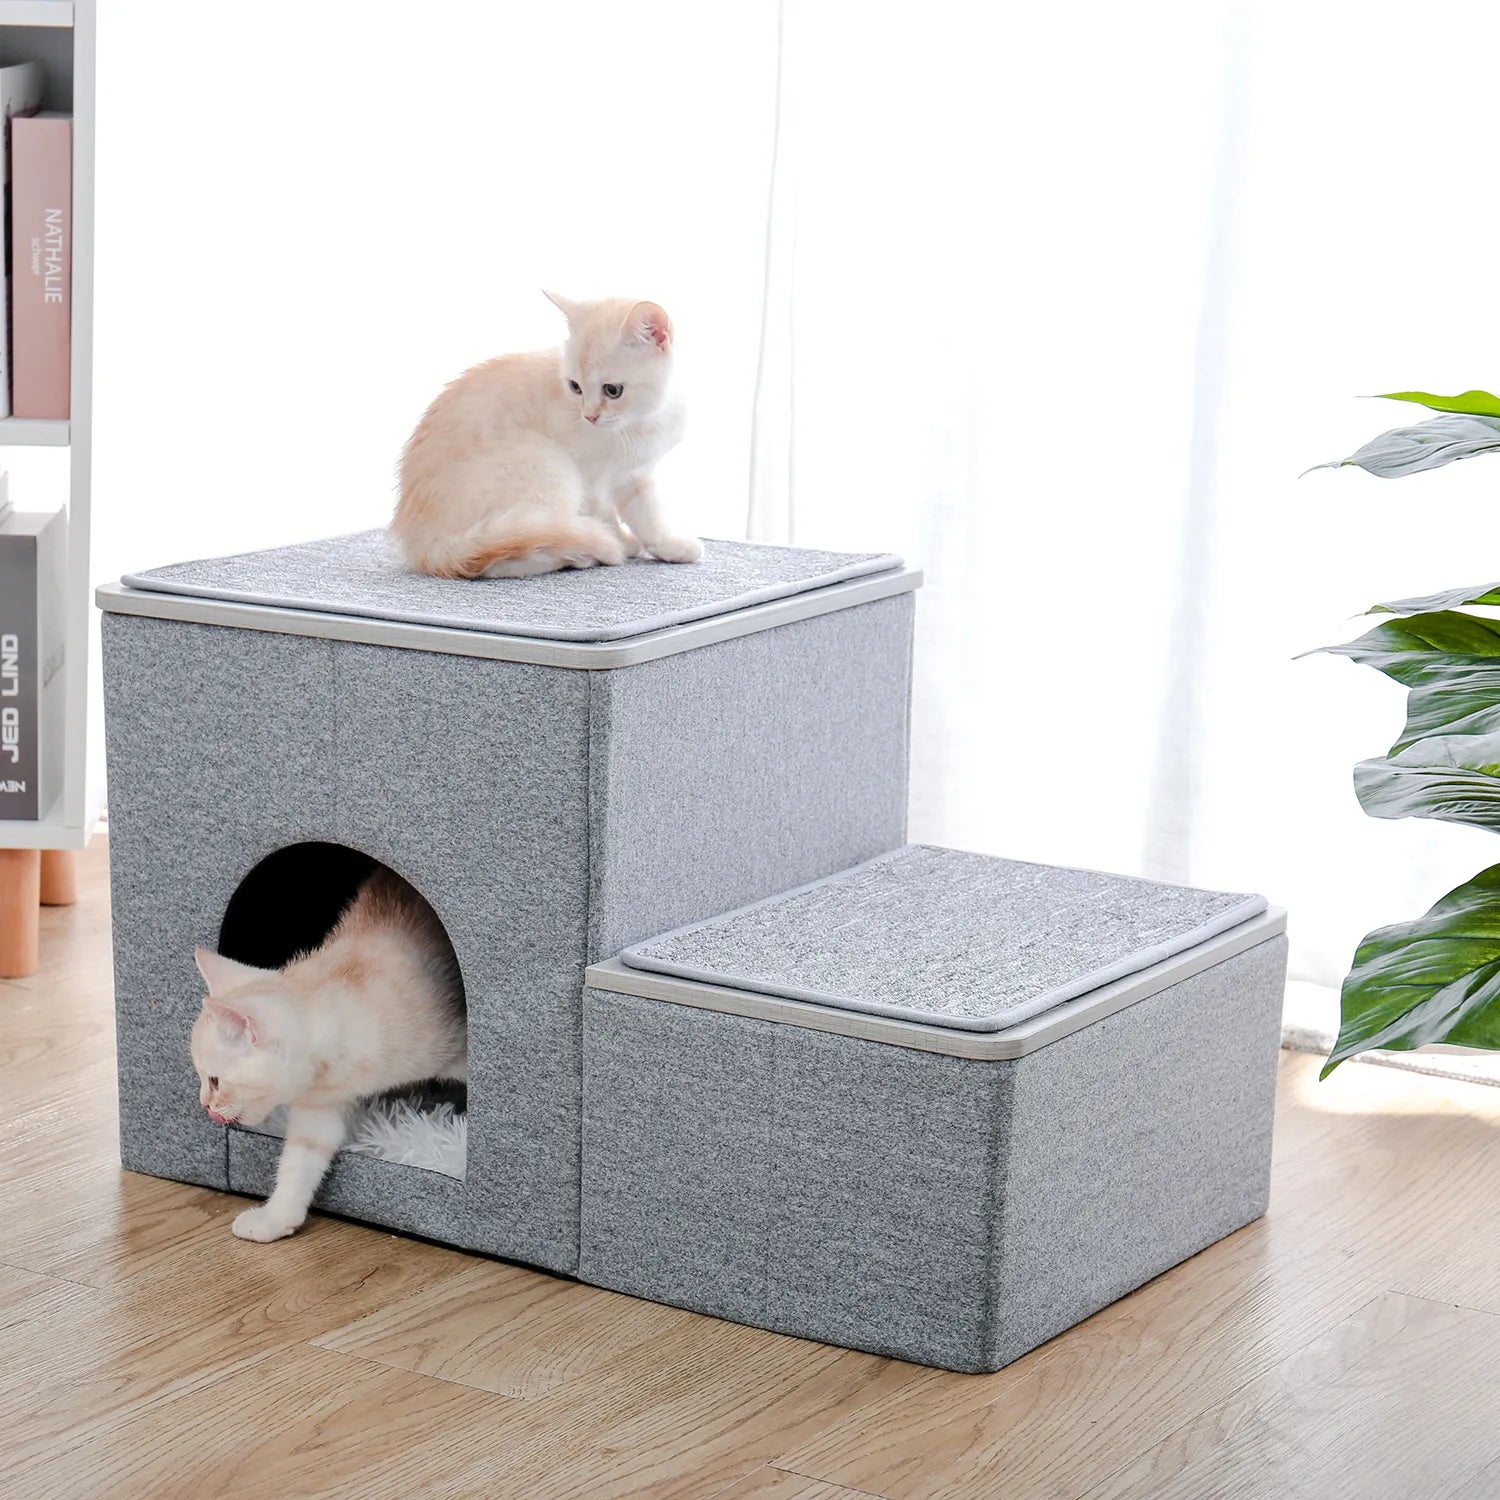 H228cm Cat Tree Toy Condo Cat Climbing Tower Multi-layer With Hammock Tower House Furniture Scratching Solid Wood Post for Kitty - Pampered Pets